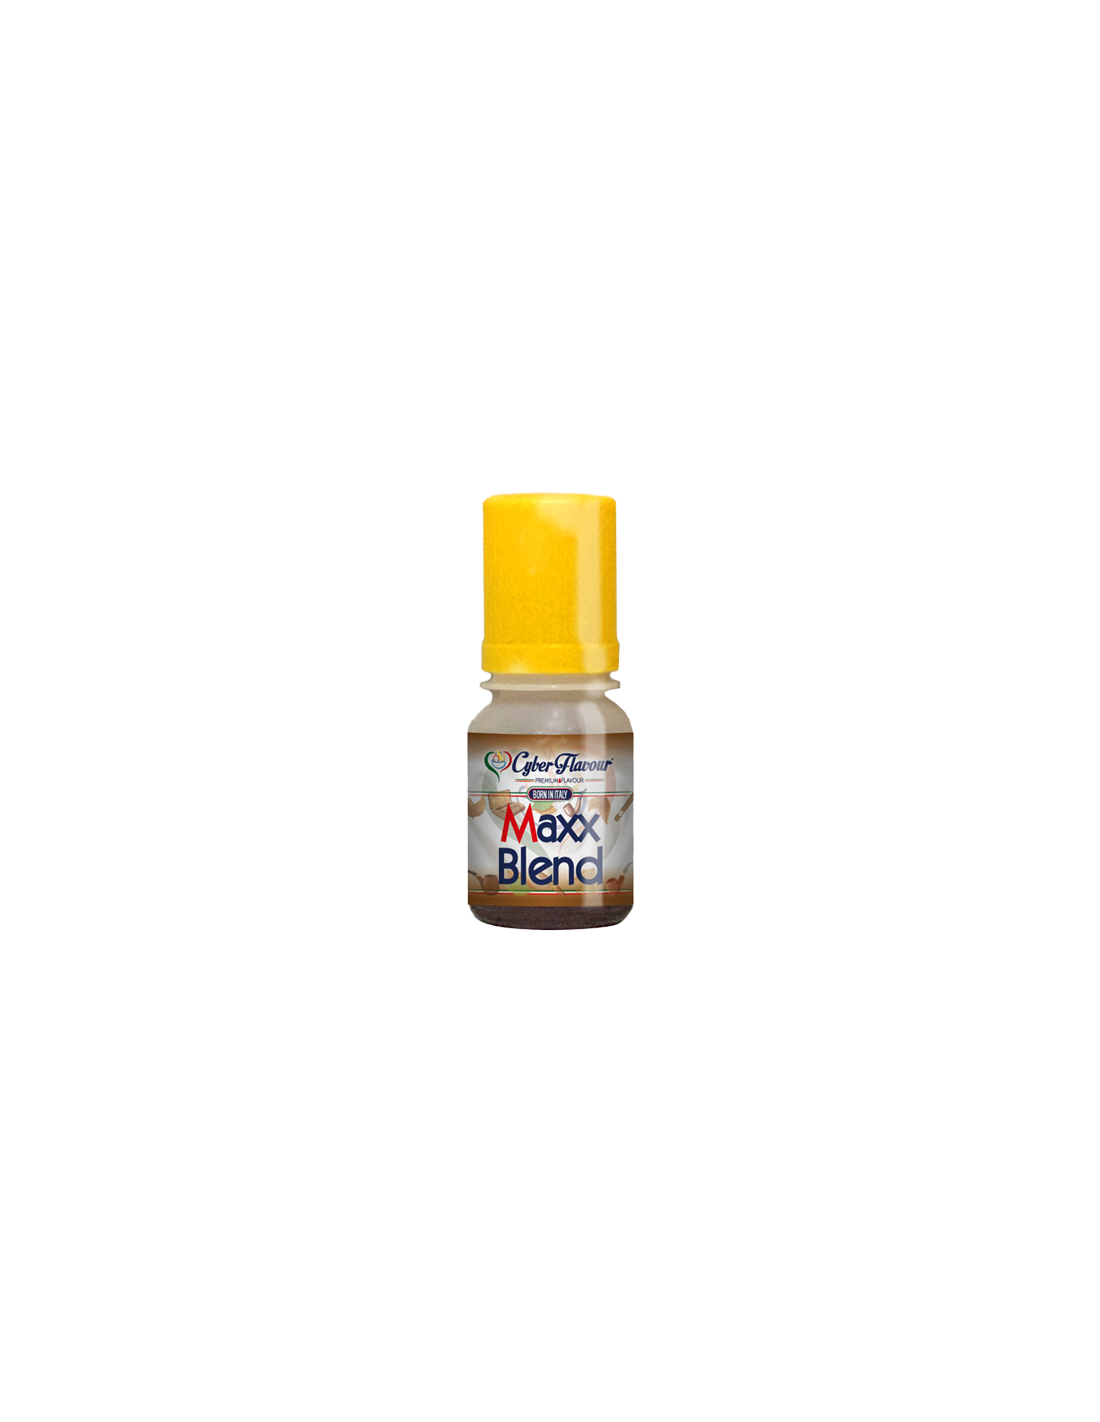 Cyber Flavour Maxx Blend Aroma Concentrato 10ml Tabacco American Blend